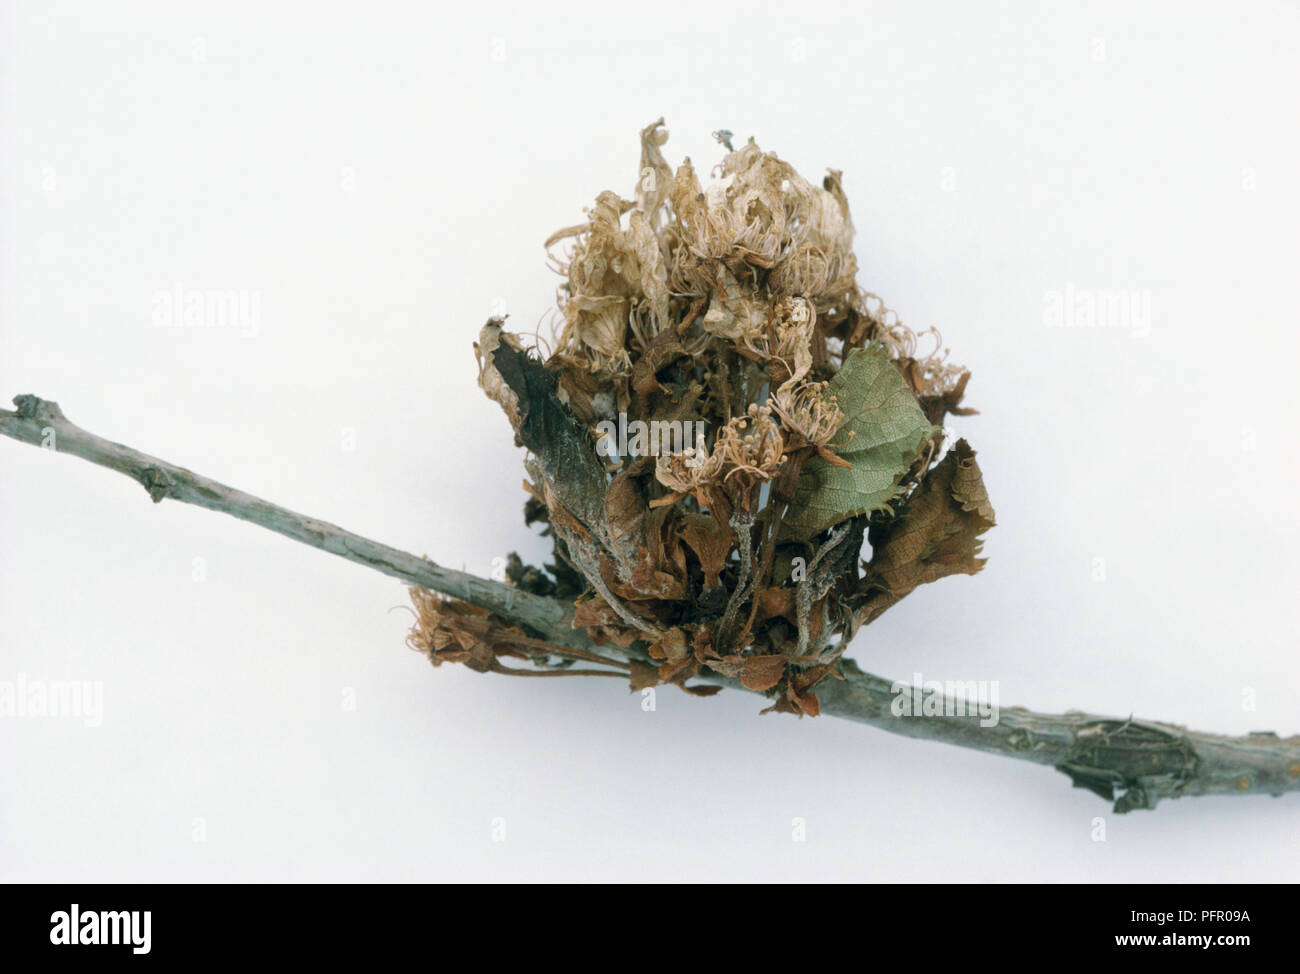 Prunus sp. flowers suffering from blossom wilt (caused by Sclerotinia sp. fungus) Stock Photo